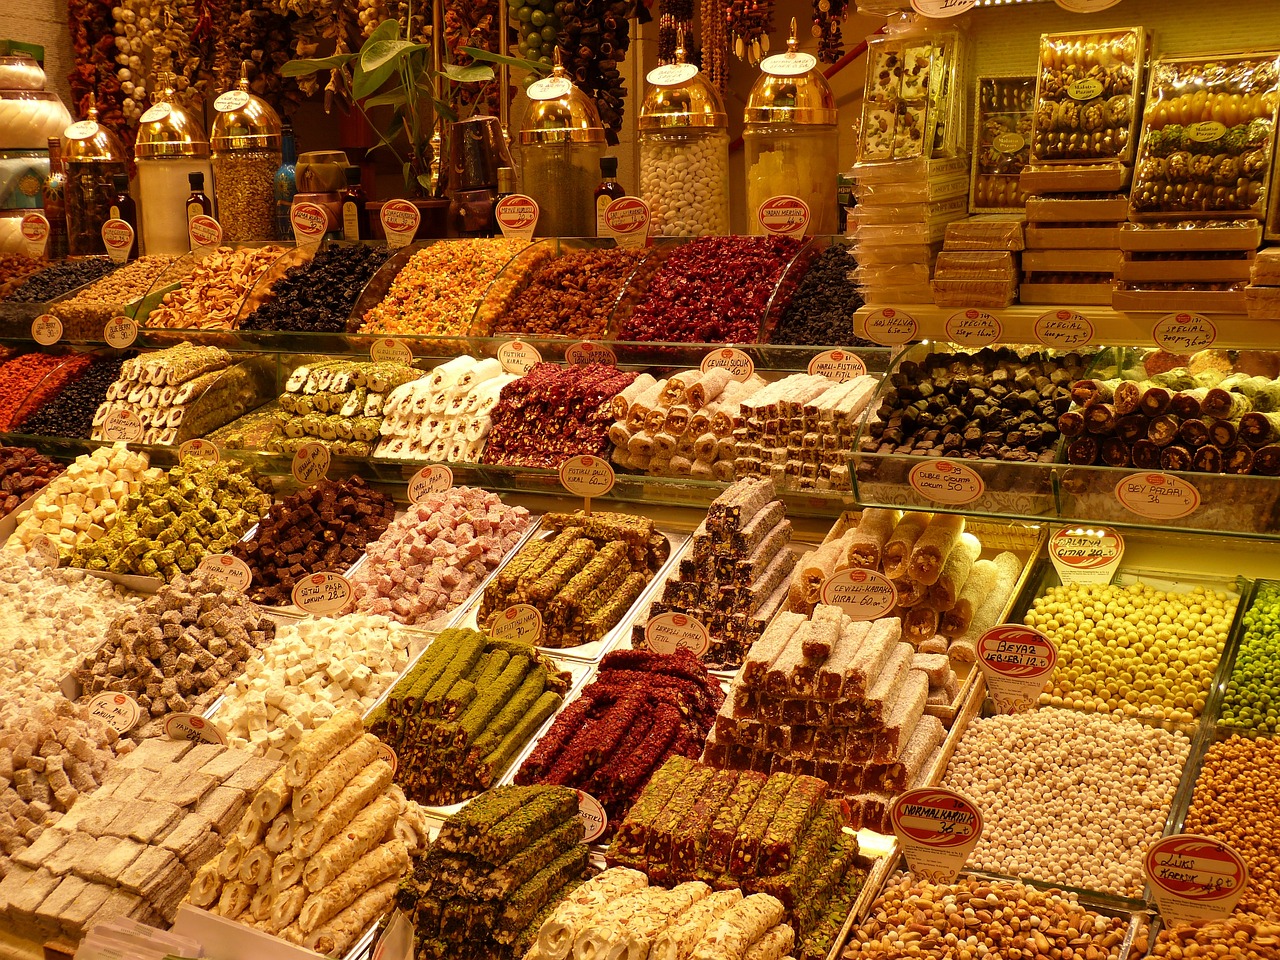 Istanbul Bazaar sweets - things to do in Turkey